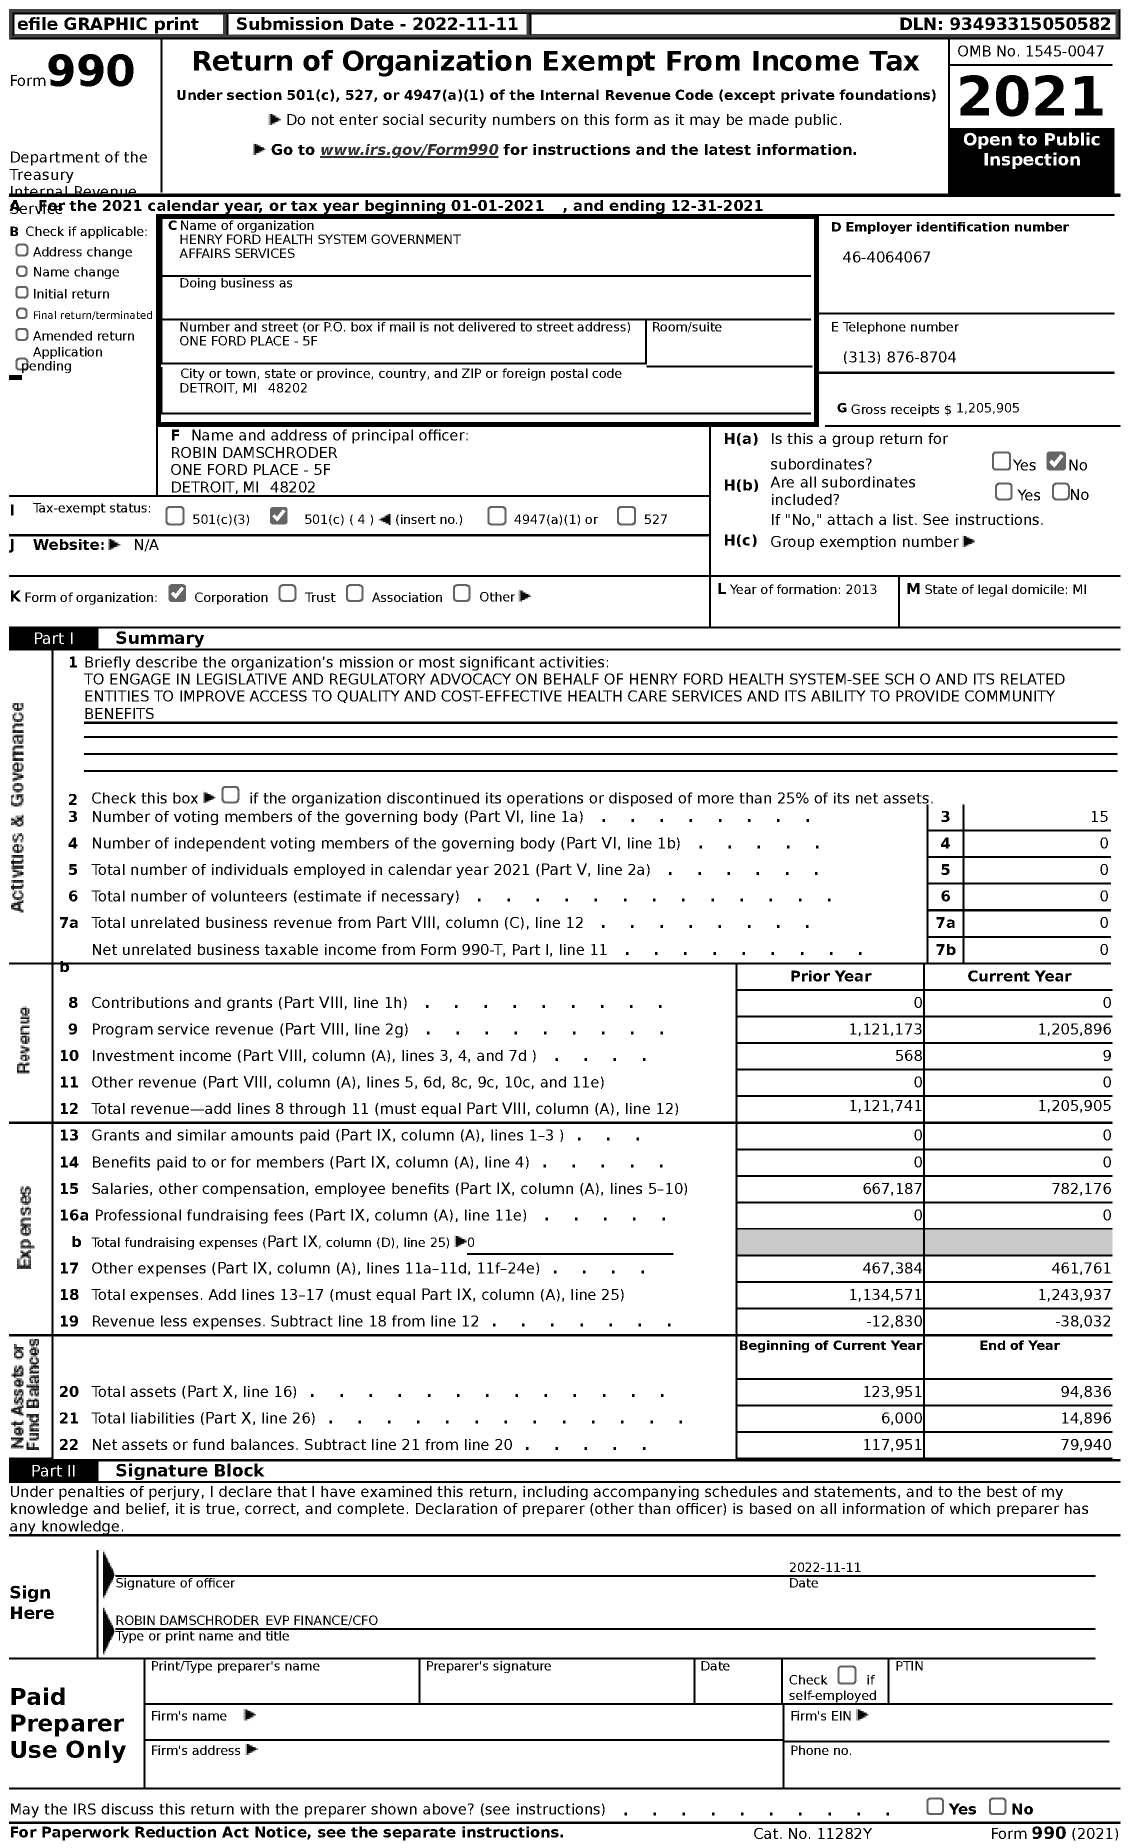 Image of first page of 2021 Form 990 for Henry Ford Health System Government Affairs Services